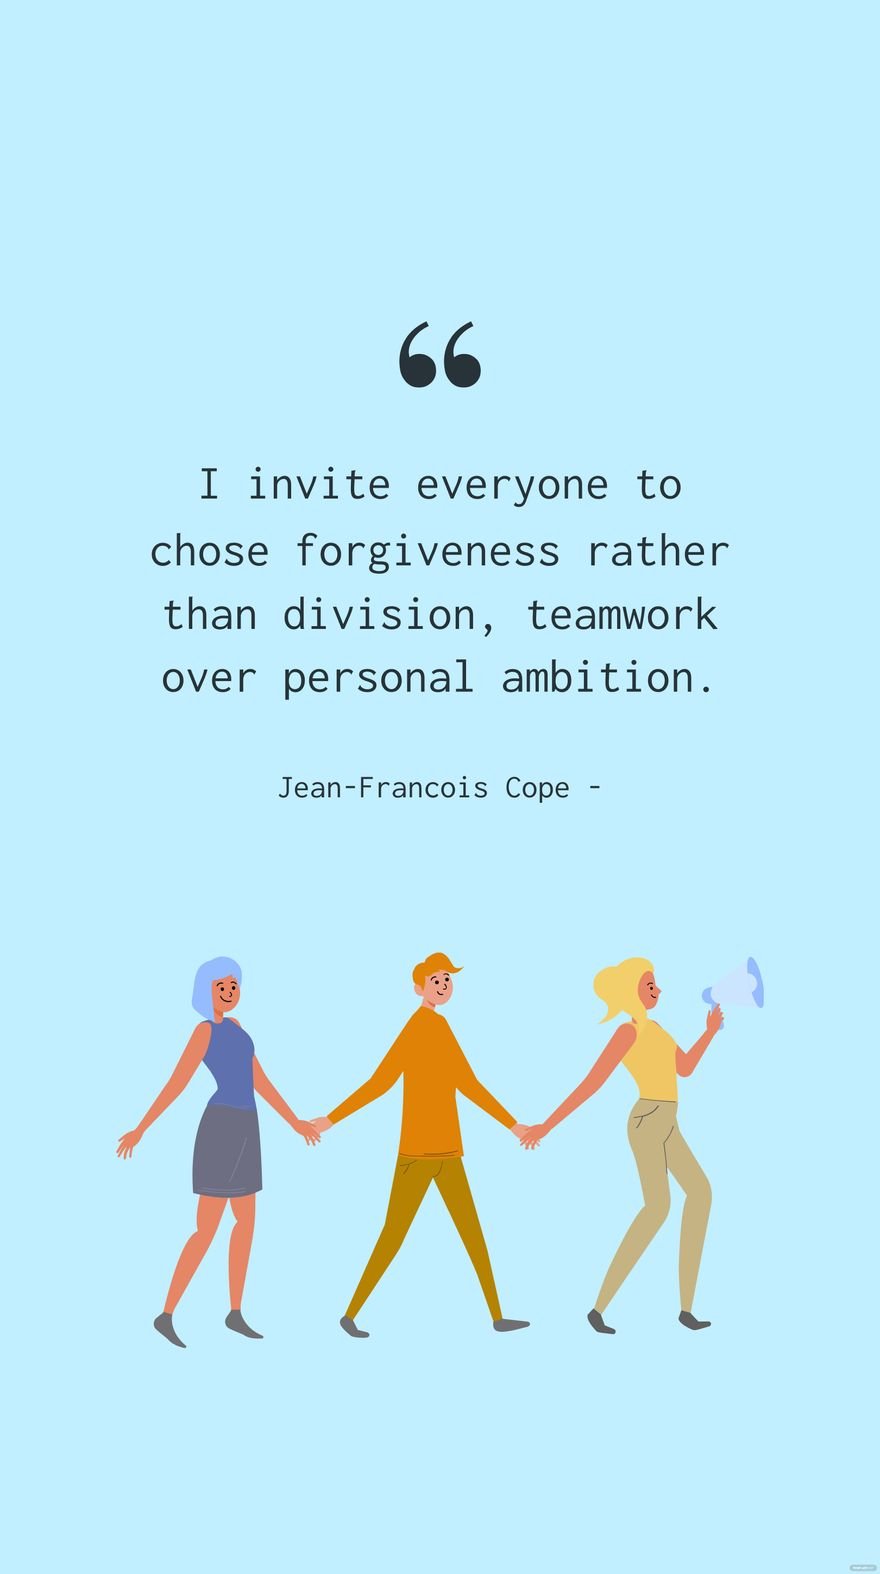 Free Jean-Francois Cope - I invite everyone to chose forgiveness rather than division, teamwork over personal ambition.